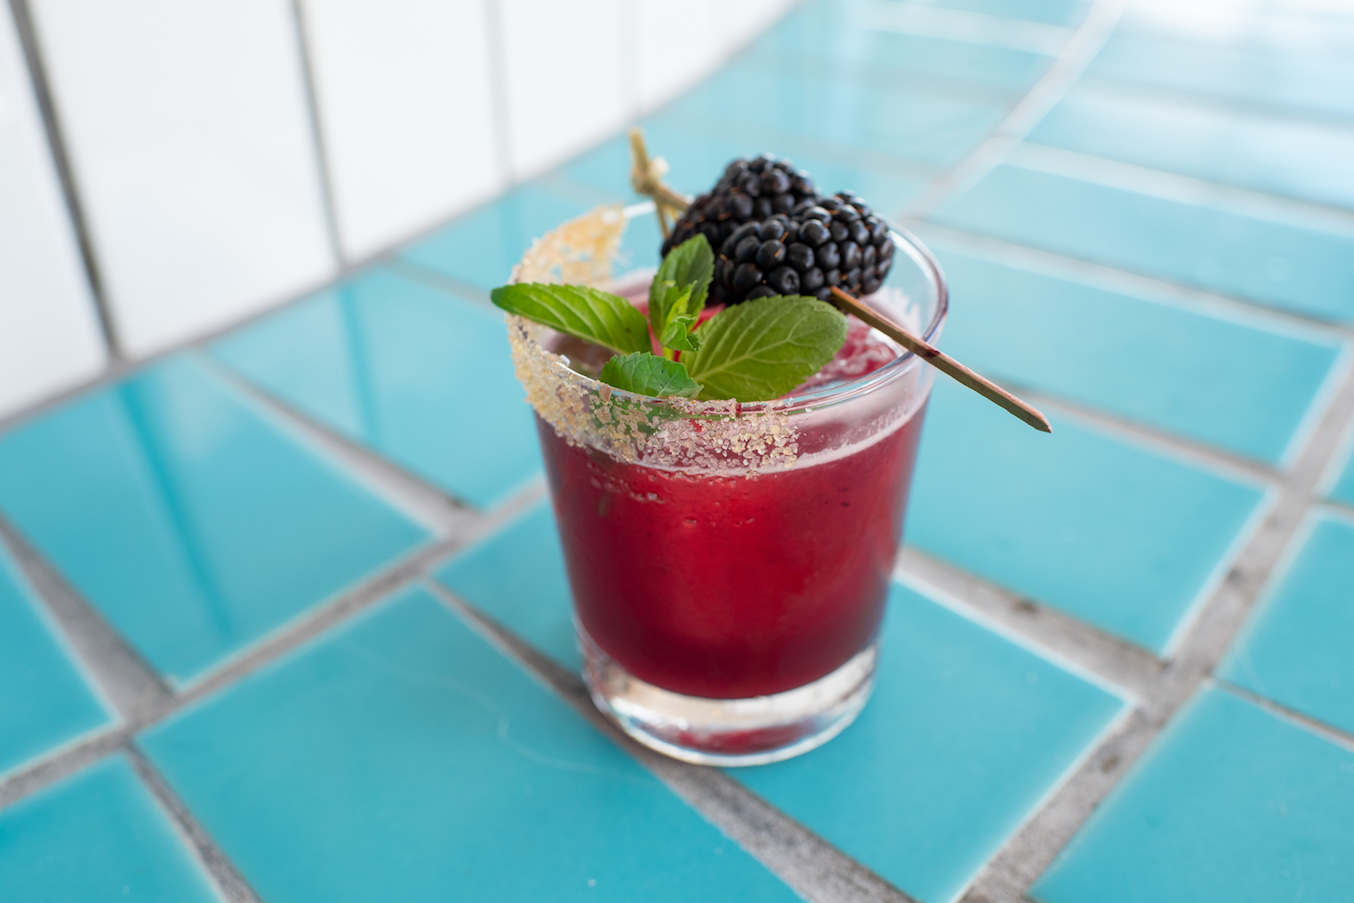 A blackberry tequila cocktail with berry and mint garnish on a blue tile counter.